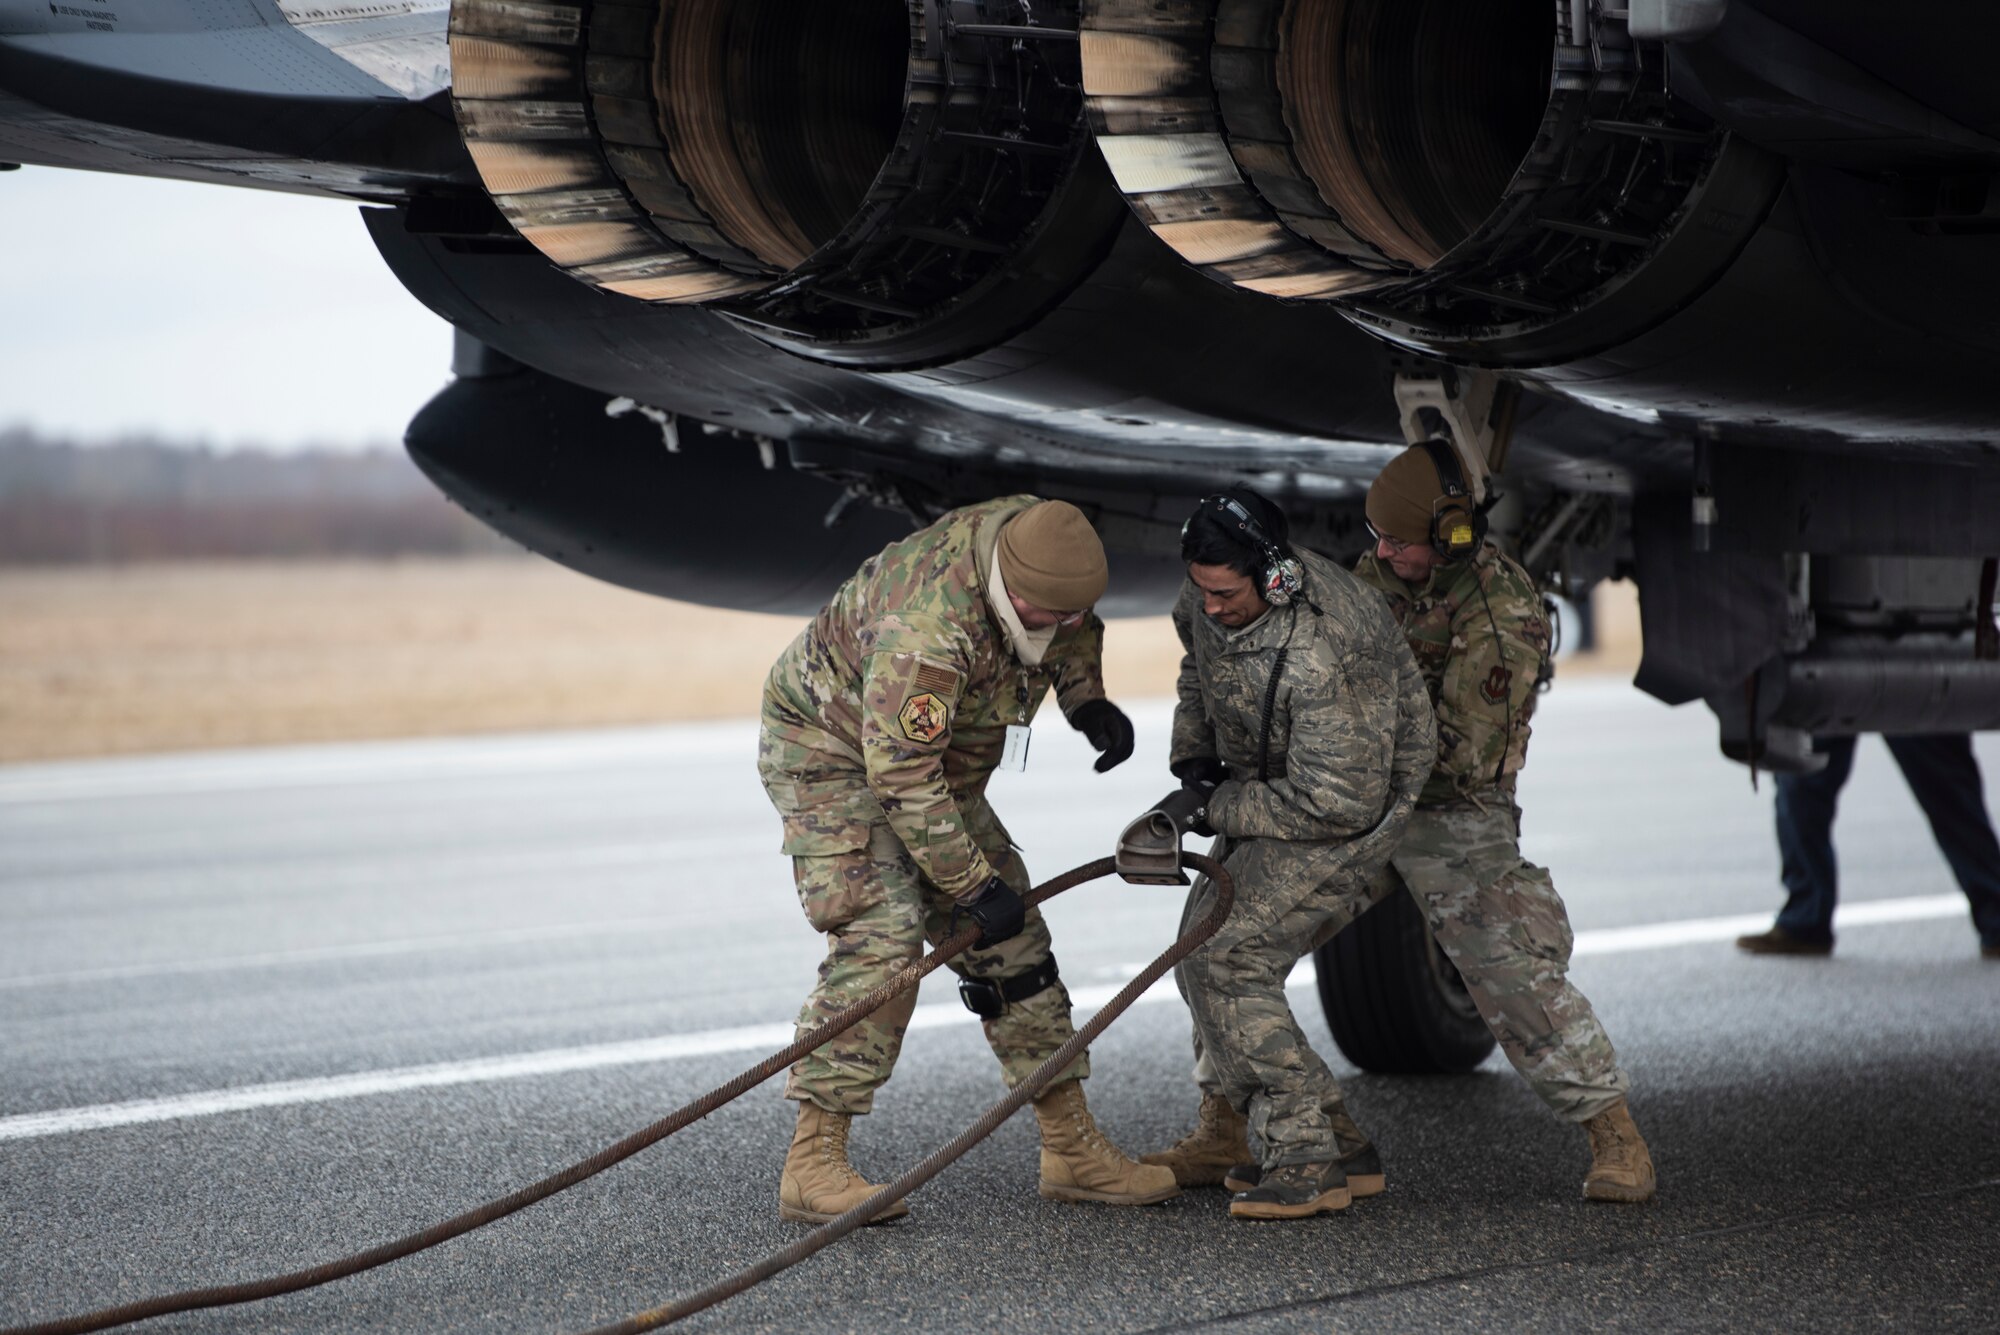 Airmen assigned to the 48th Aircraft Maintenance Squadron release the cable from the tailhook of a 492nd Fighter Squadron F-15E Strike Eagle during a Barrier Arresting Kit certification at Ämari Air Base, Estonia, March 17, 2021. During the test, the tailhook or arresting hook is dropped from the back of the F-15 as it fast taxis down the runway and catches the cable, which acts as a braking system to safely slow the aircraft during an emergency that would prevent the aircraft from performing a standard landing. (U.S. Air Force photo by Airman 1st Class Jessi Monte)